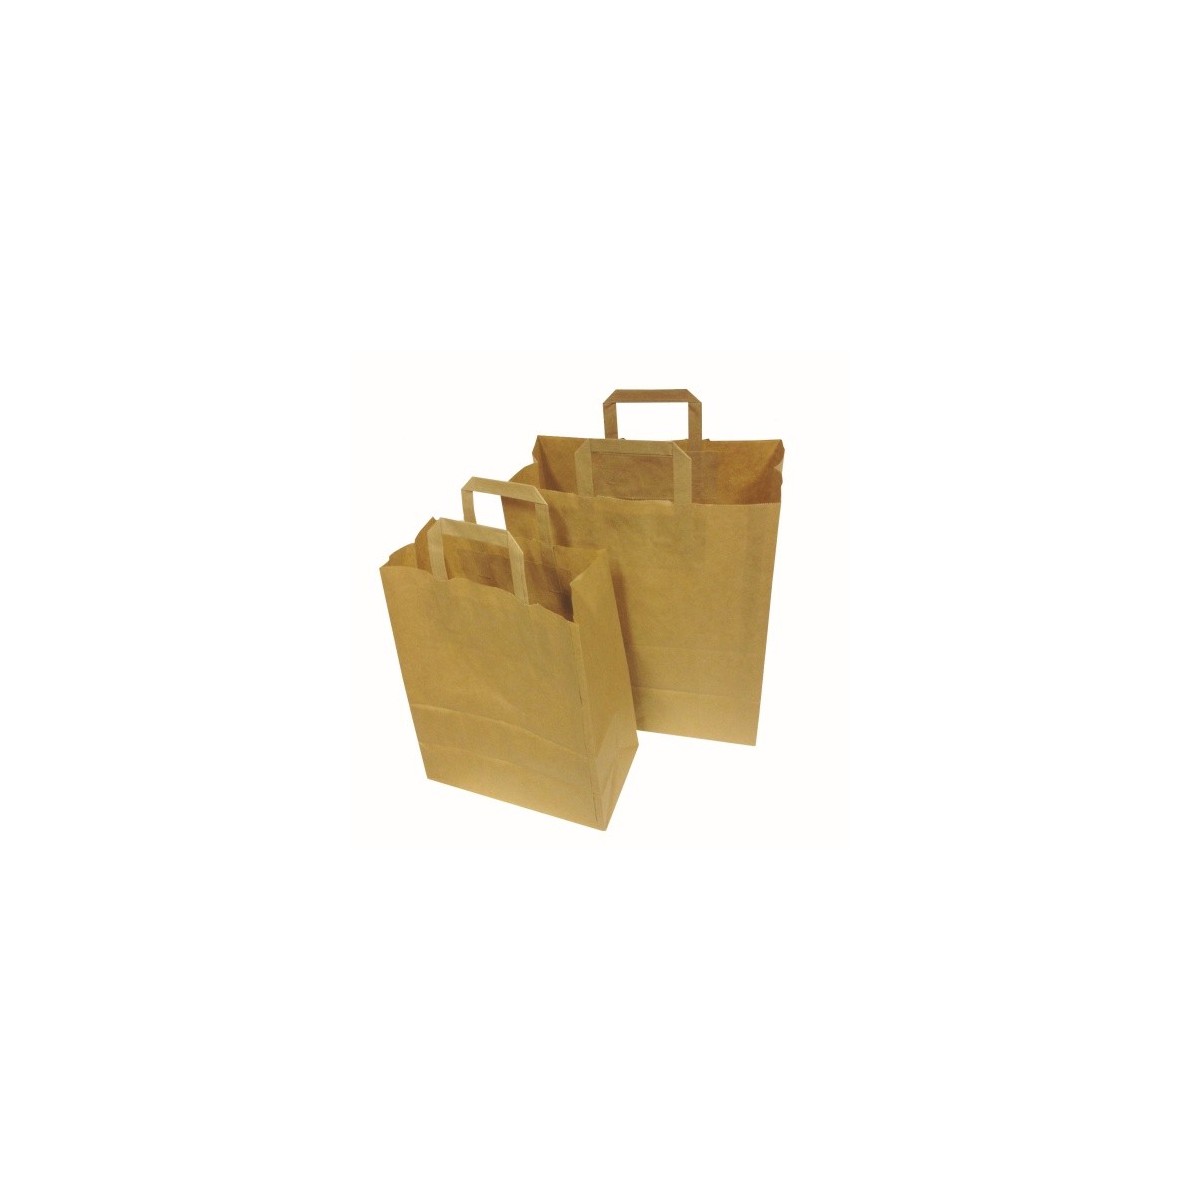 BROWN KRAFT PAPER BAG 32 X 16 X 39CM LARGE 50 PIECES FOST+2020 INCL. 0,14553€  PACKAGE